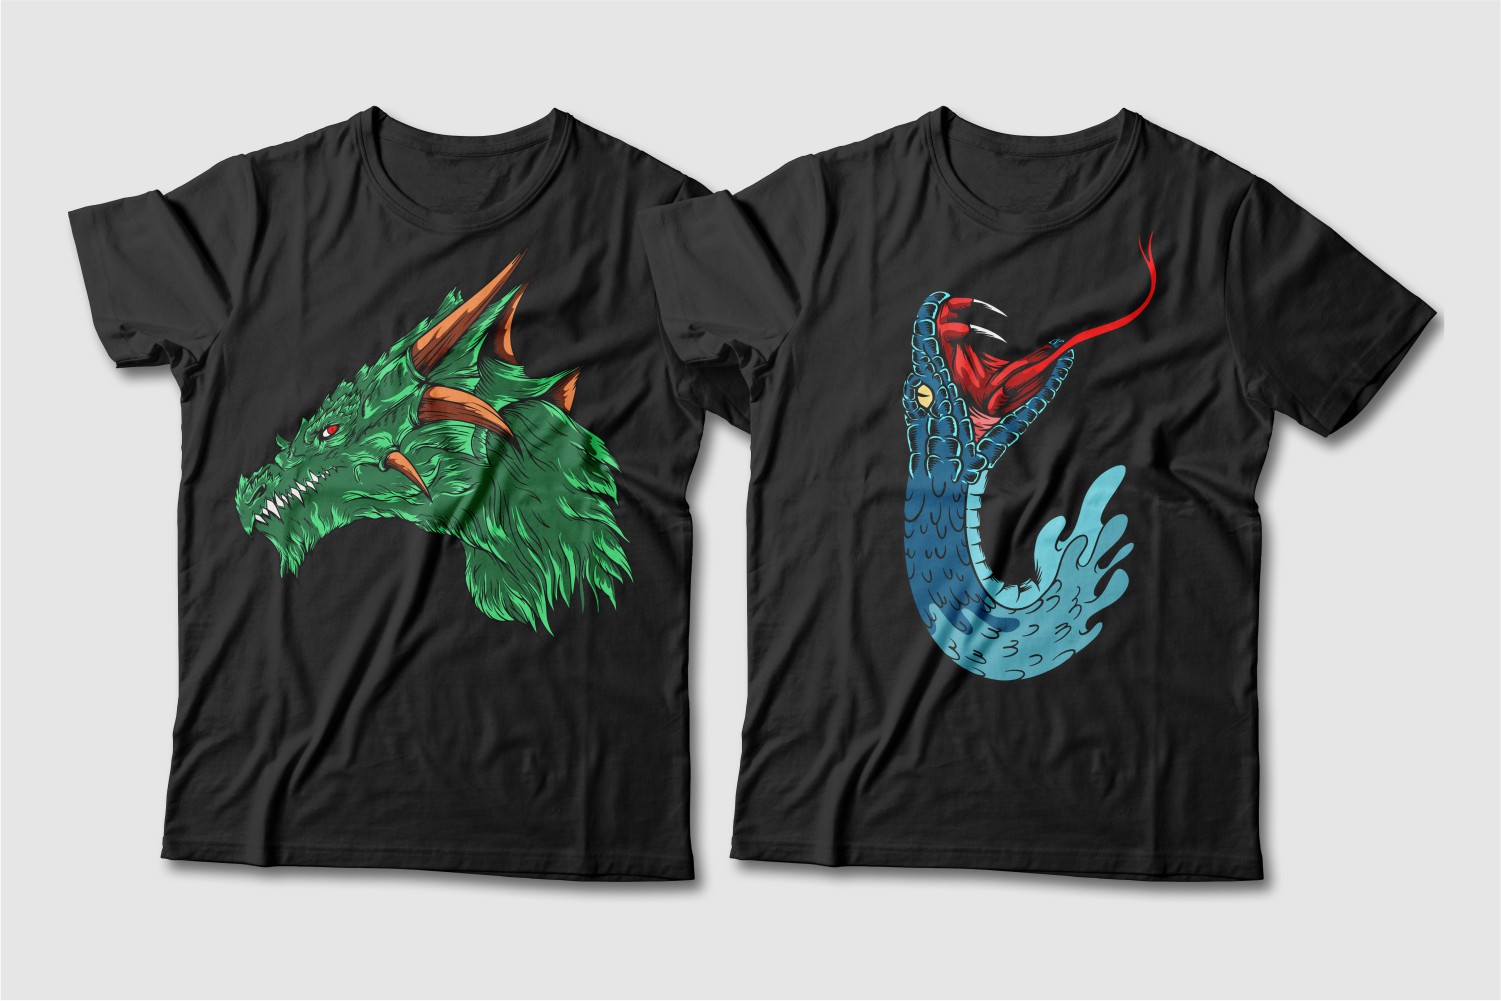 Black T-shirts featuring a green horned dragon and a blue snake with a tongue.